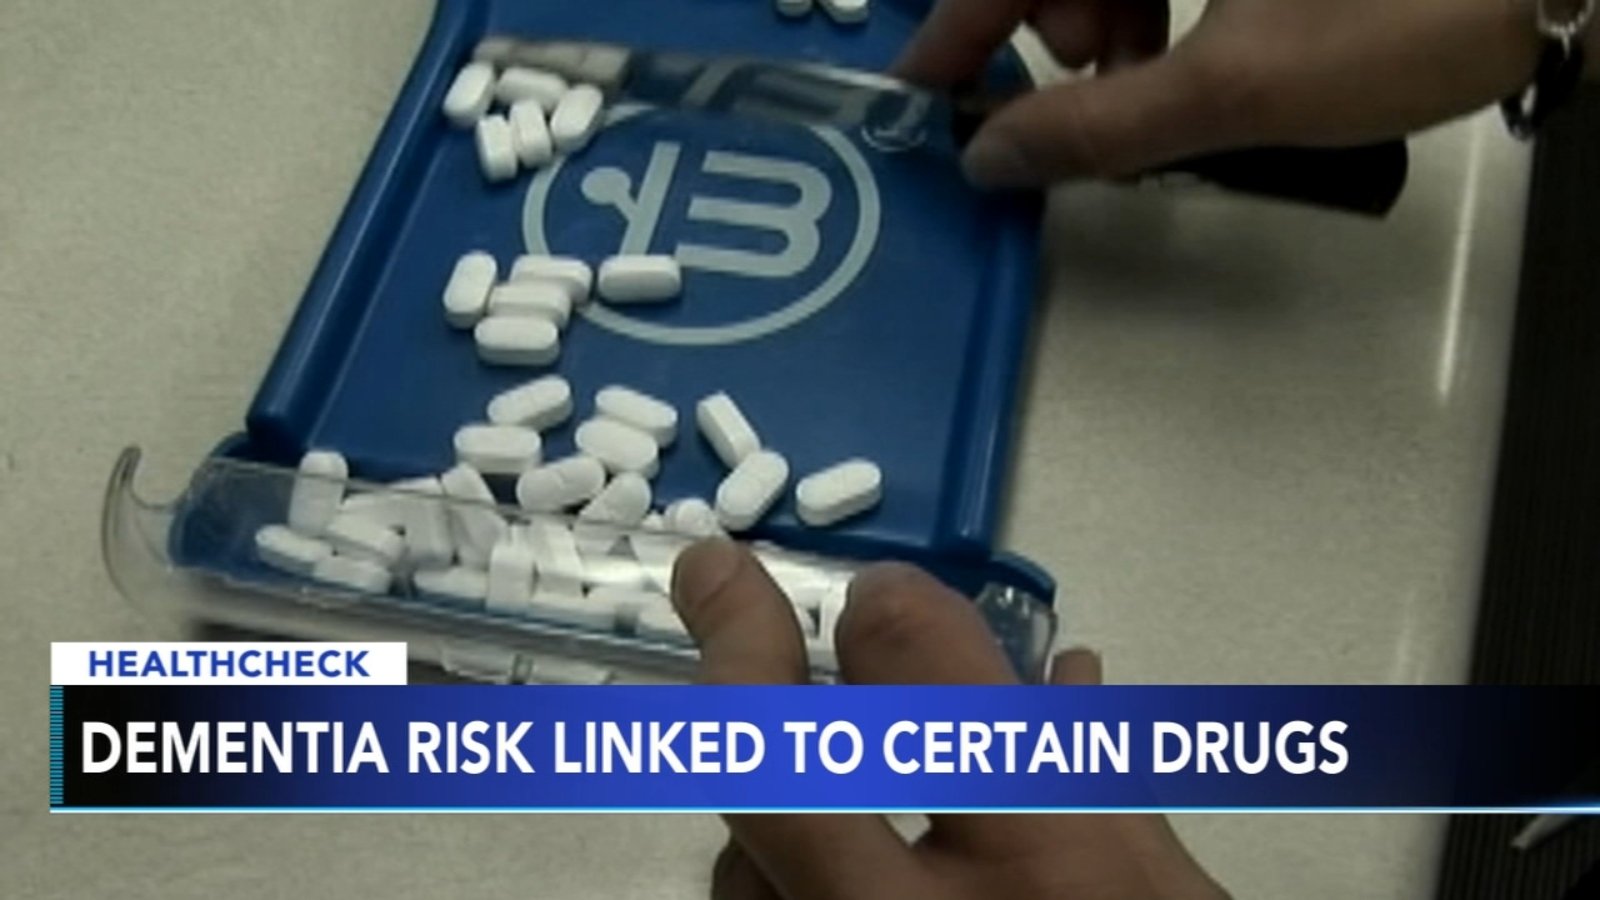 Commonly prescribed drugs tied to higher dementia risk, study shows ...